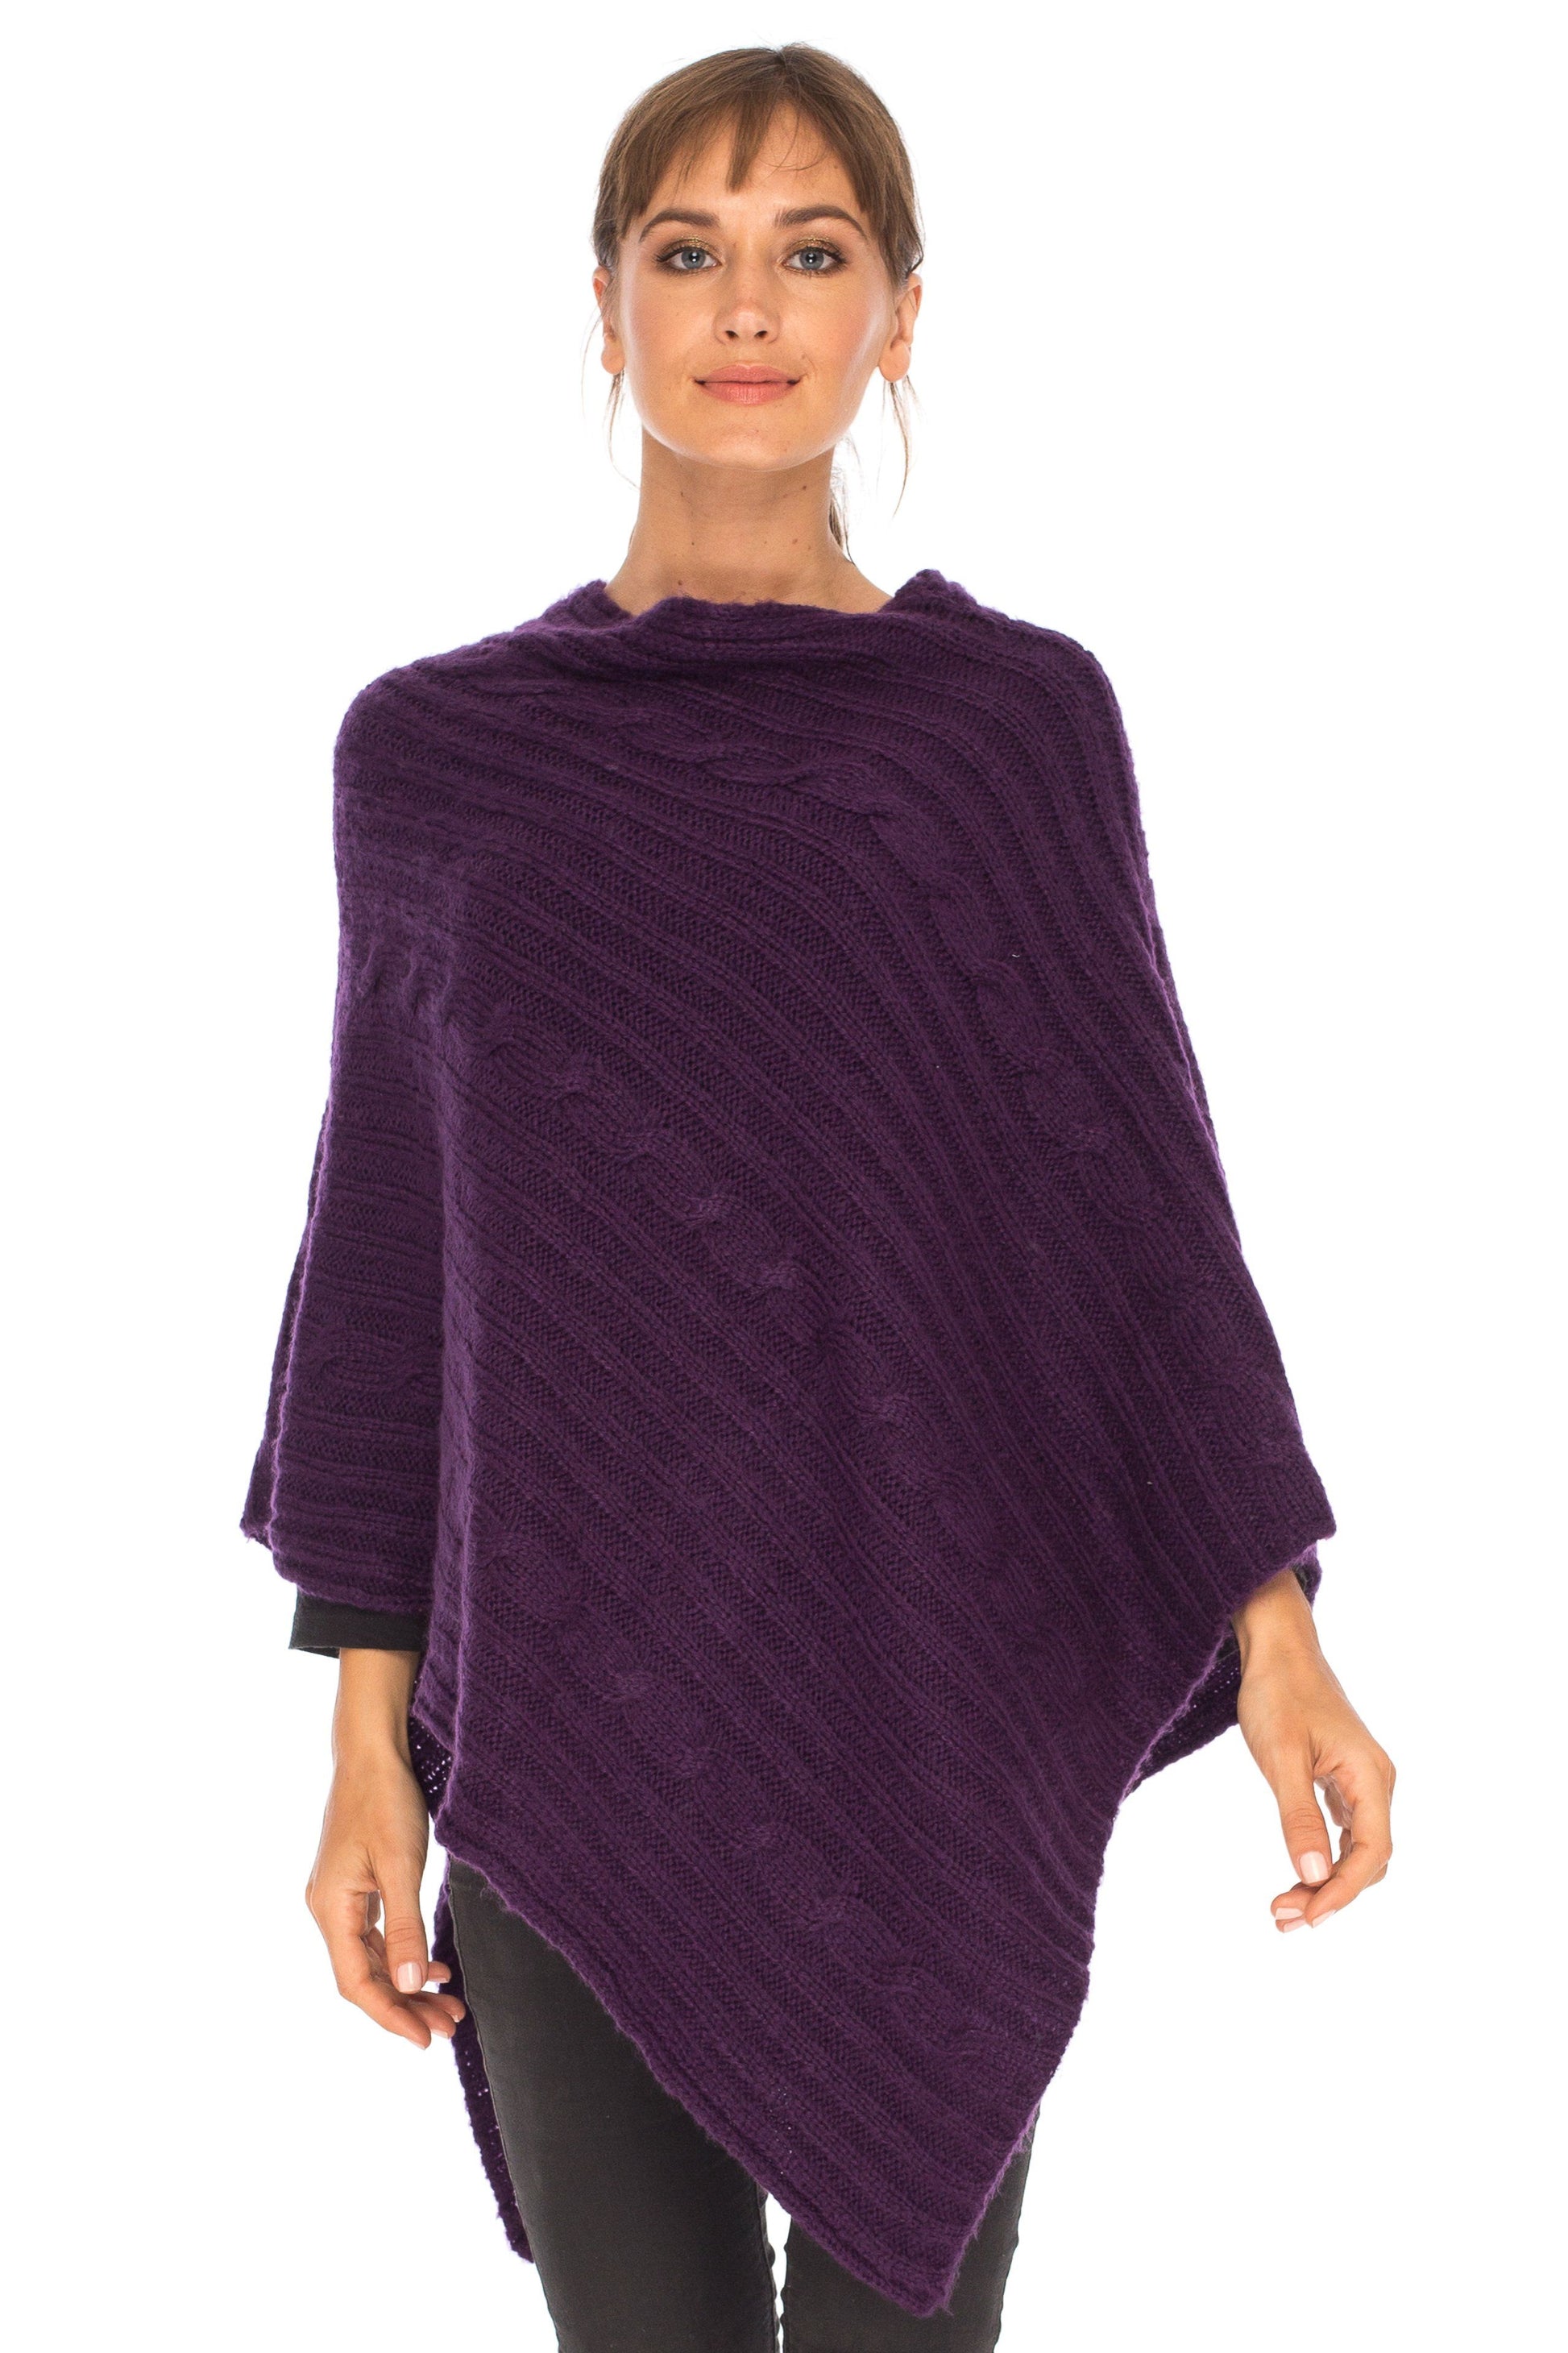 Cozette Cable Knit Poncho Pullover with Boat Neckline - Love-Shu-Shi